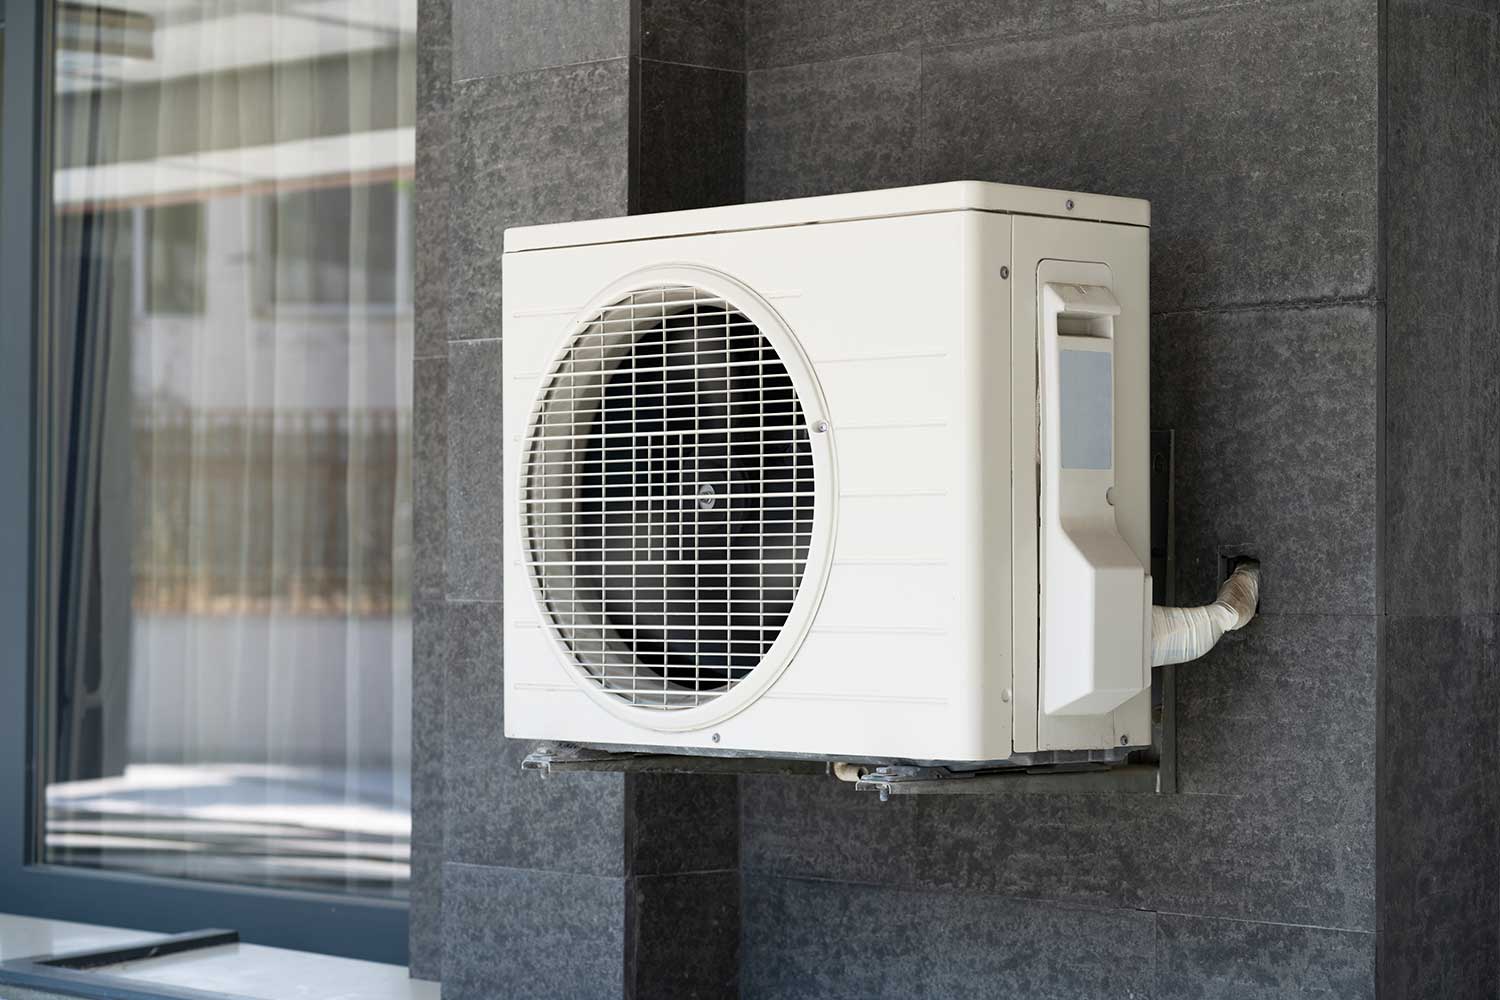 Heating plus Cooling the Home With a Good Heating plus Air Conditioning System is Critical